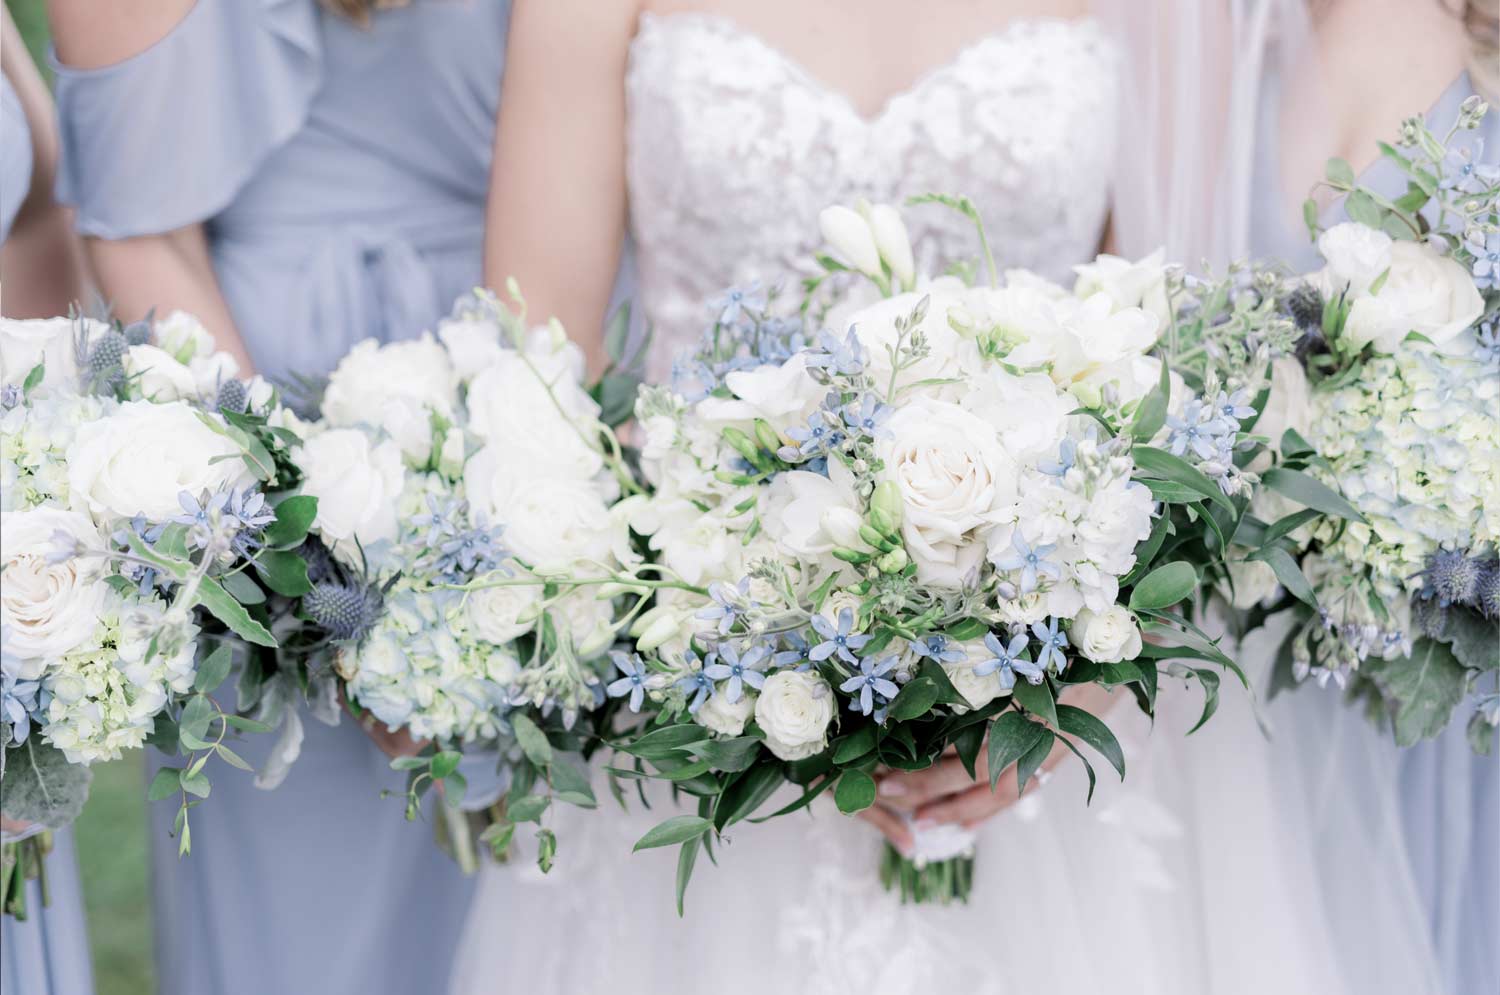 Dusty blue wedding ideas feature a beautiful bouquet of blue and white florals